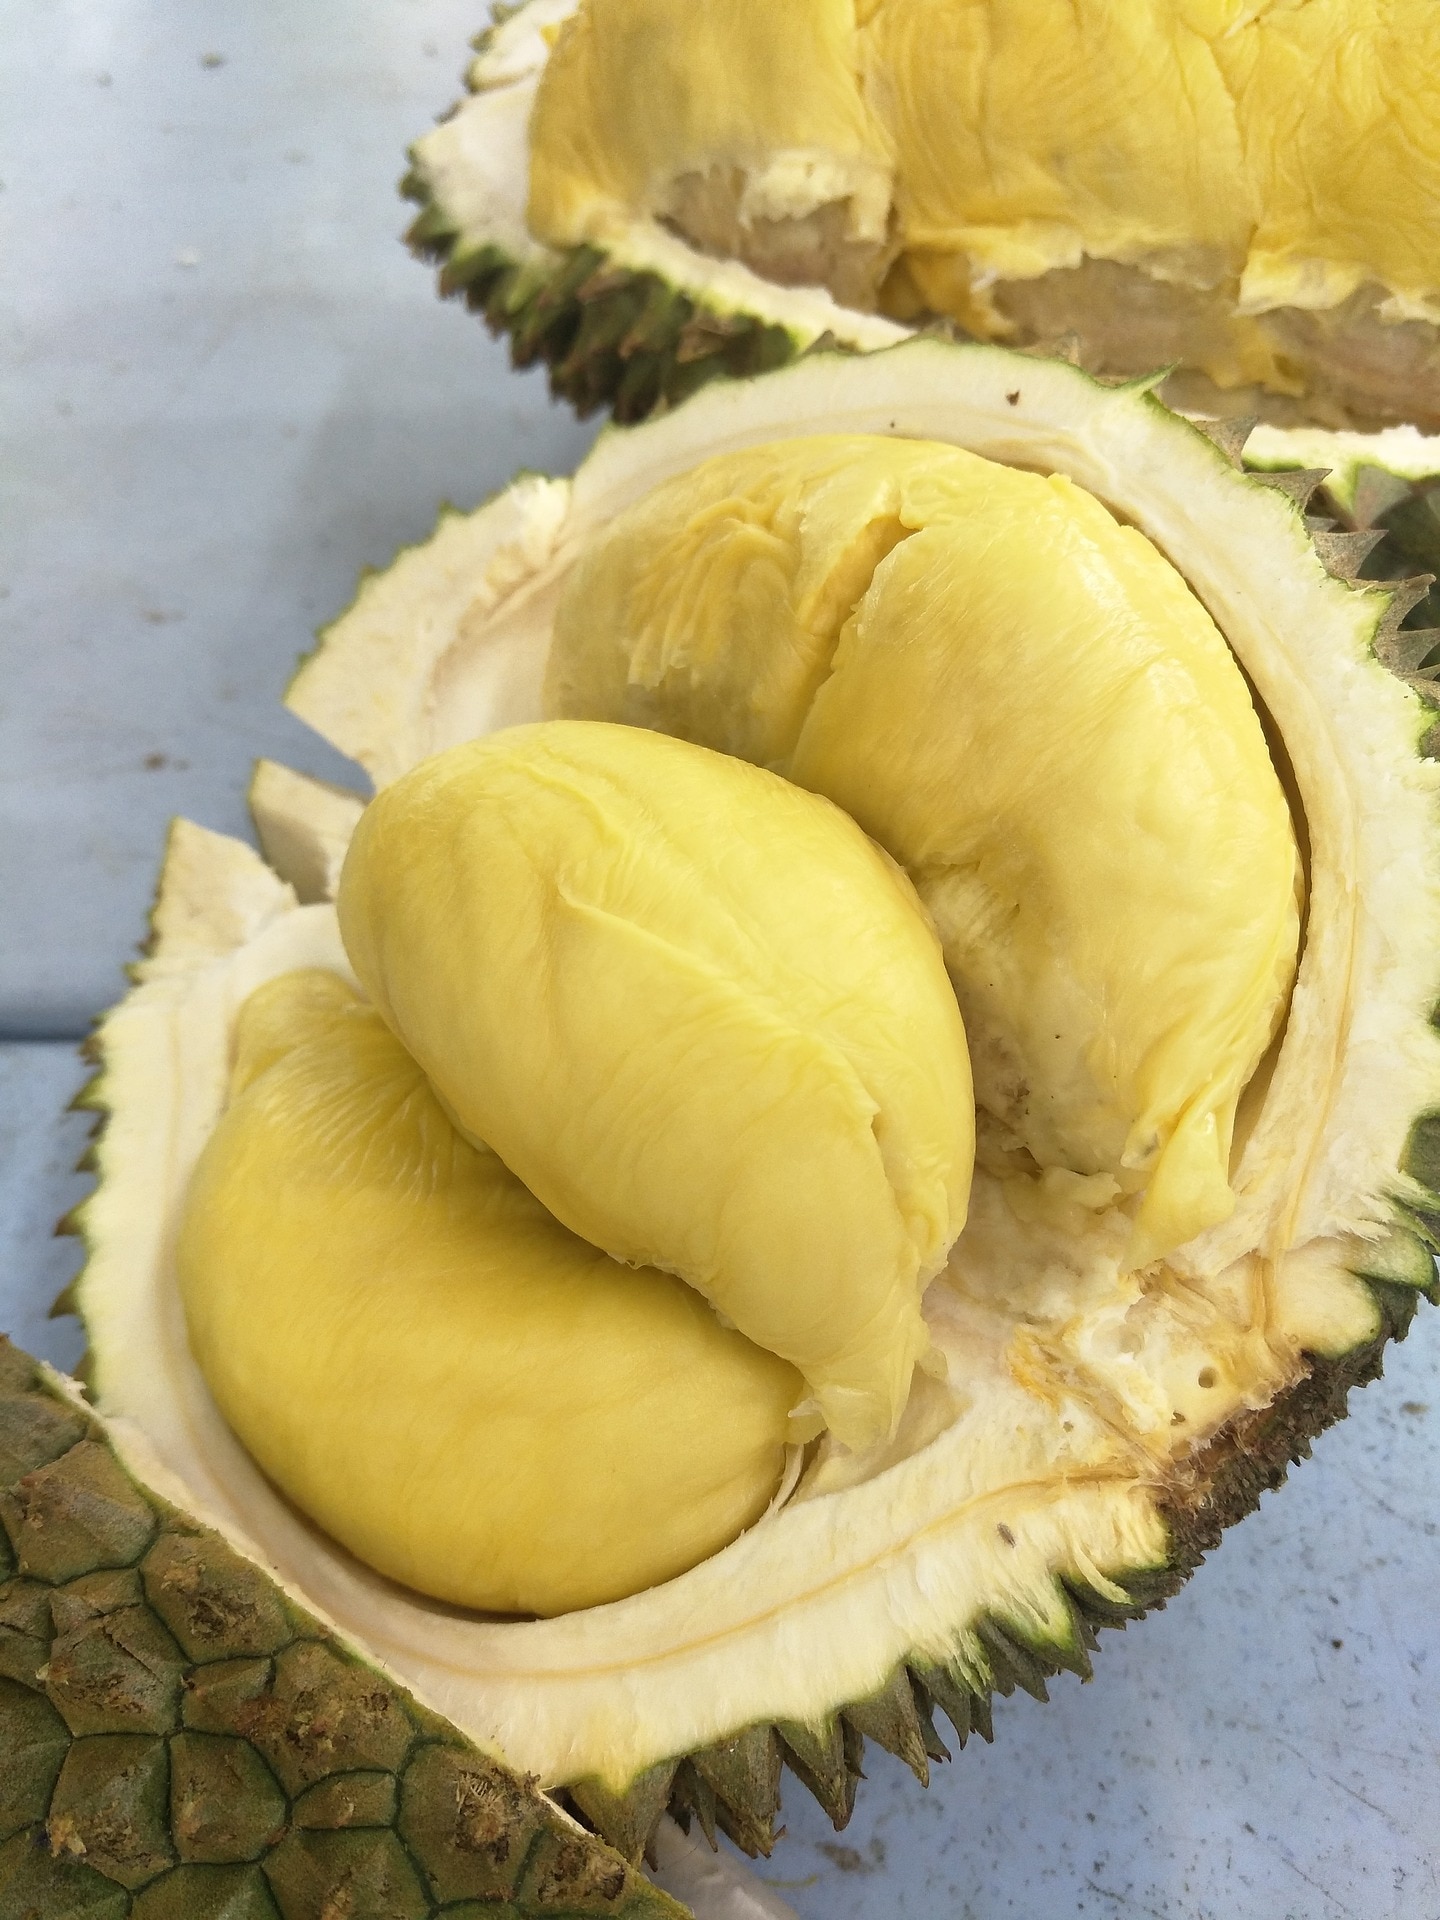 SBS Language | Stinking expensive fruit: The durian selling for nearly